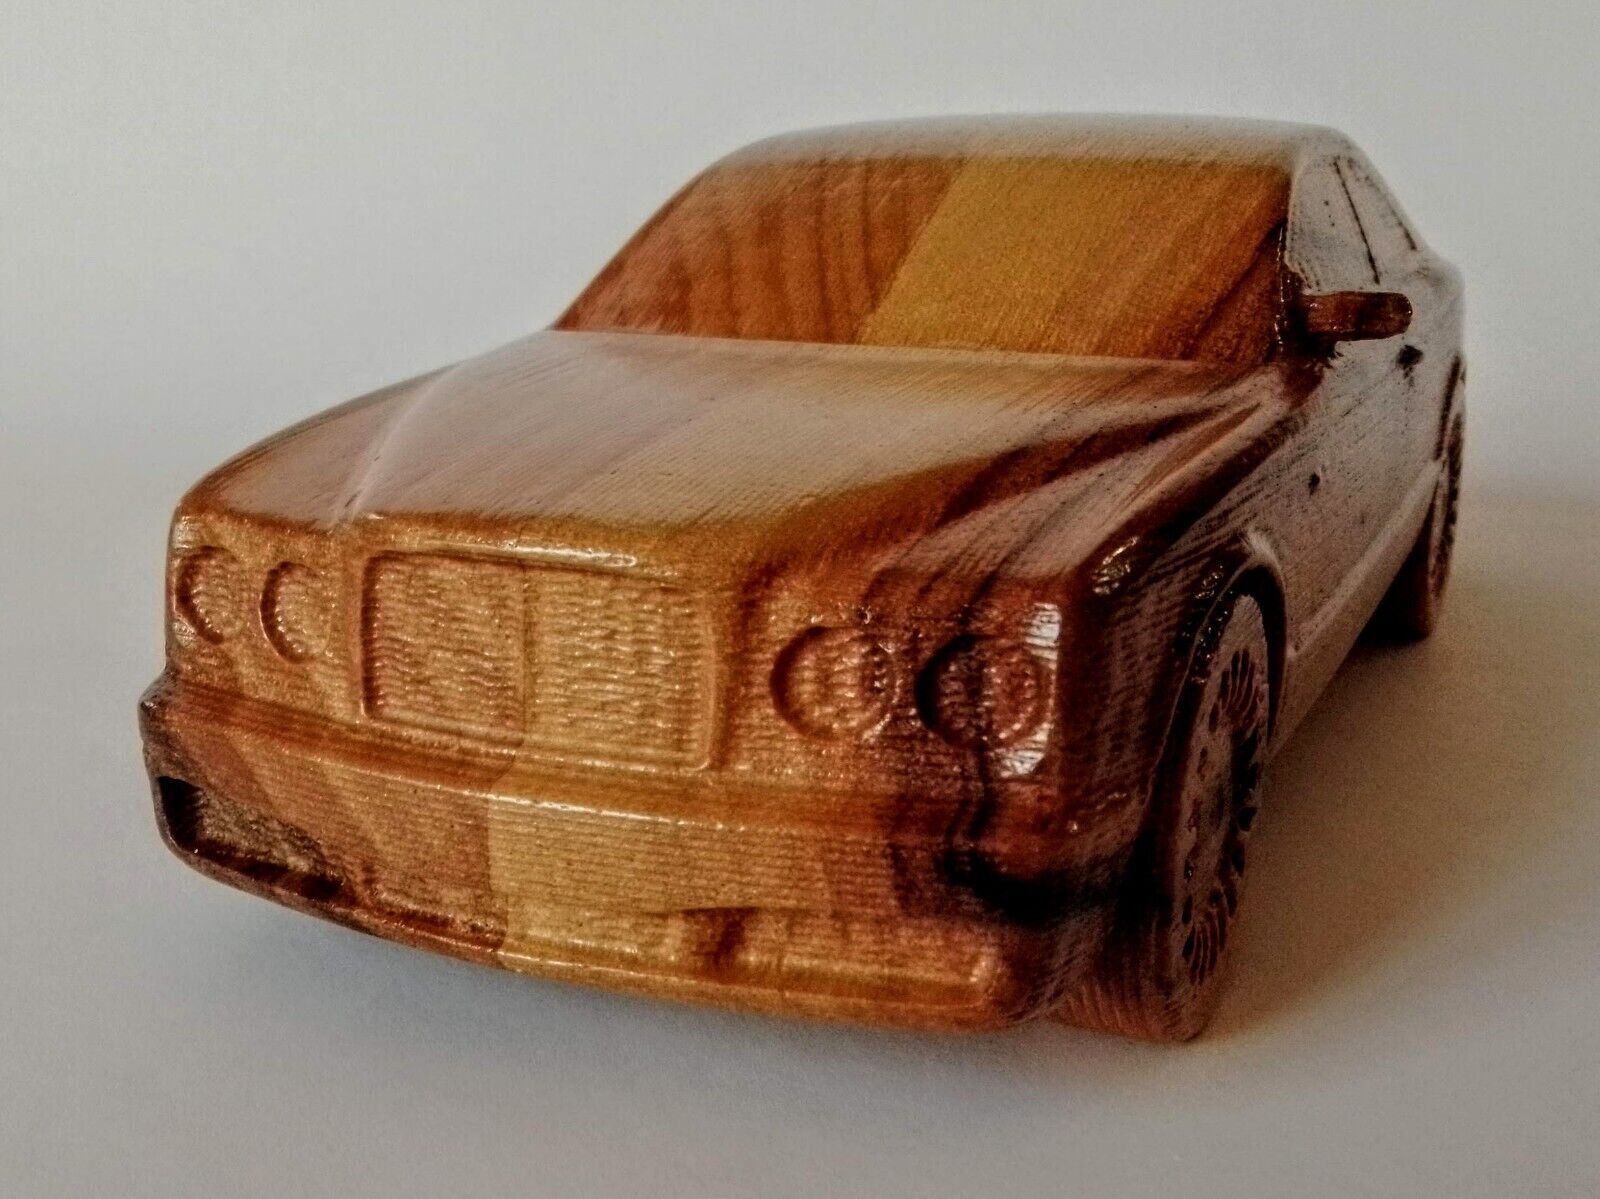 Bentley Brooklands Coupé 1:18 Wood Scale Model Car Vehicle Replica Oldtimer Toy